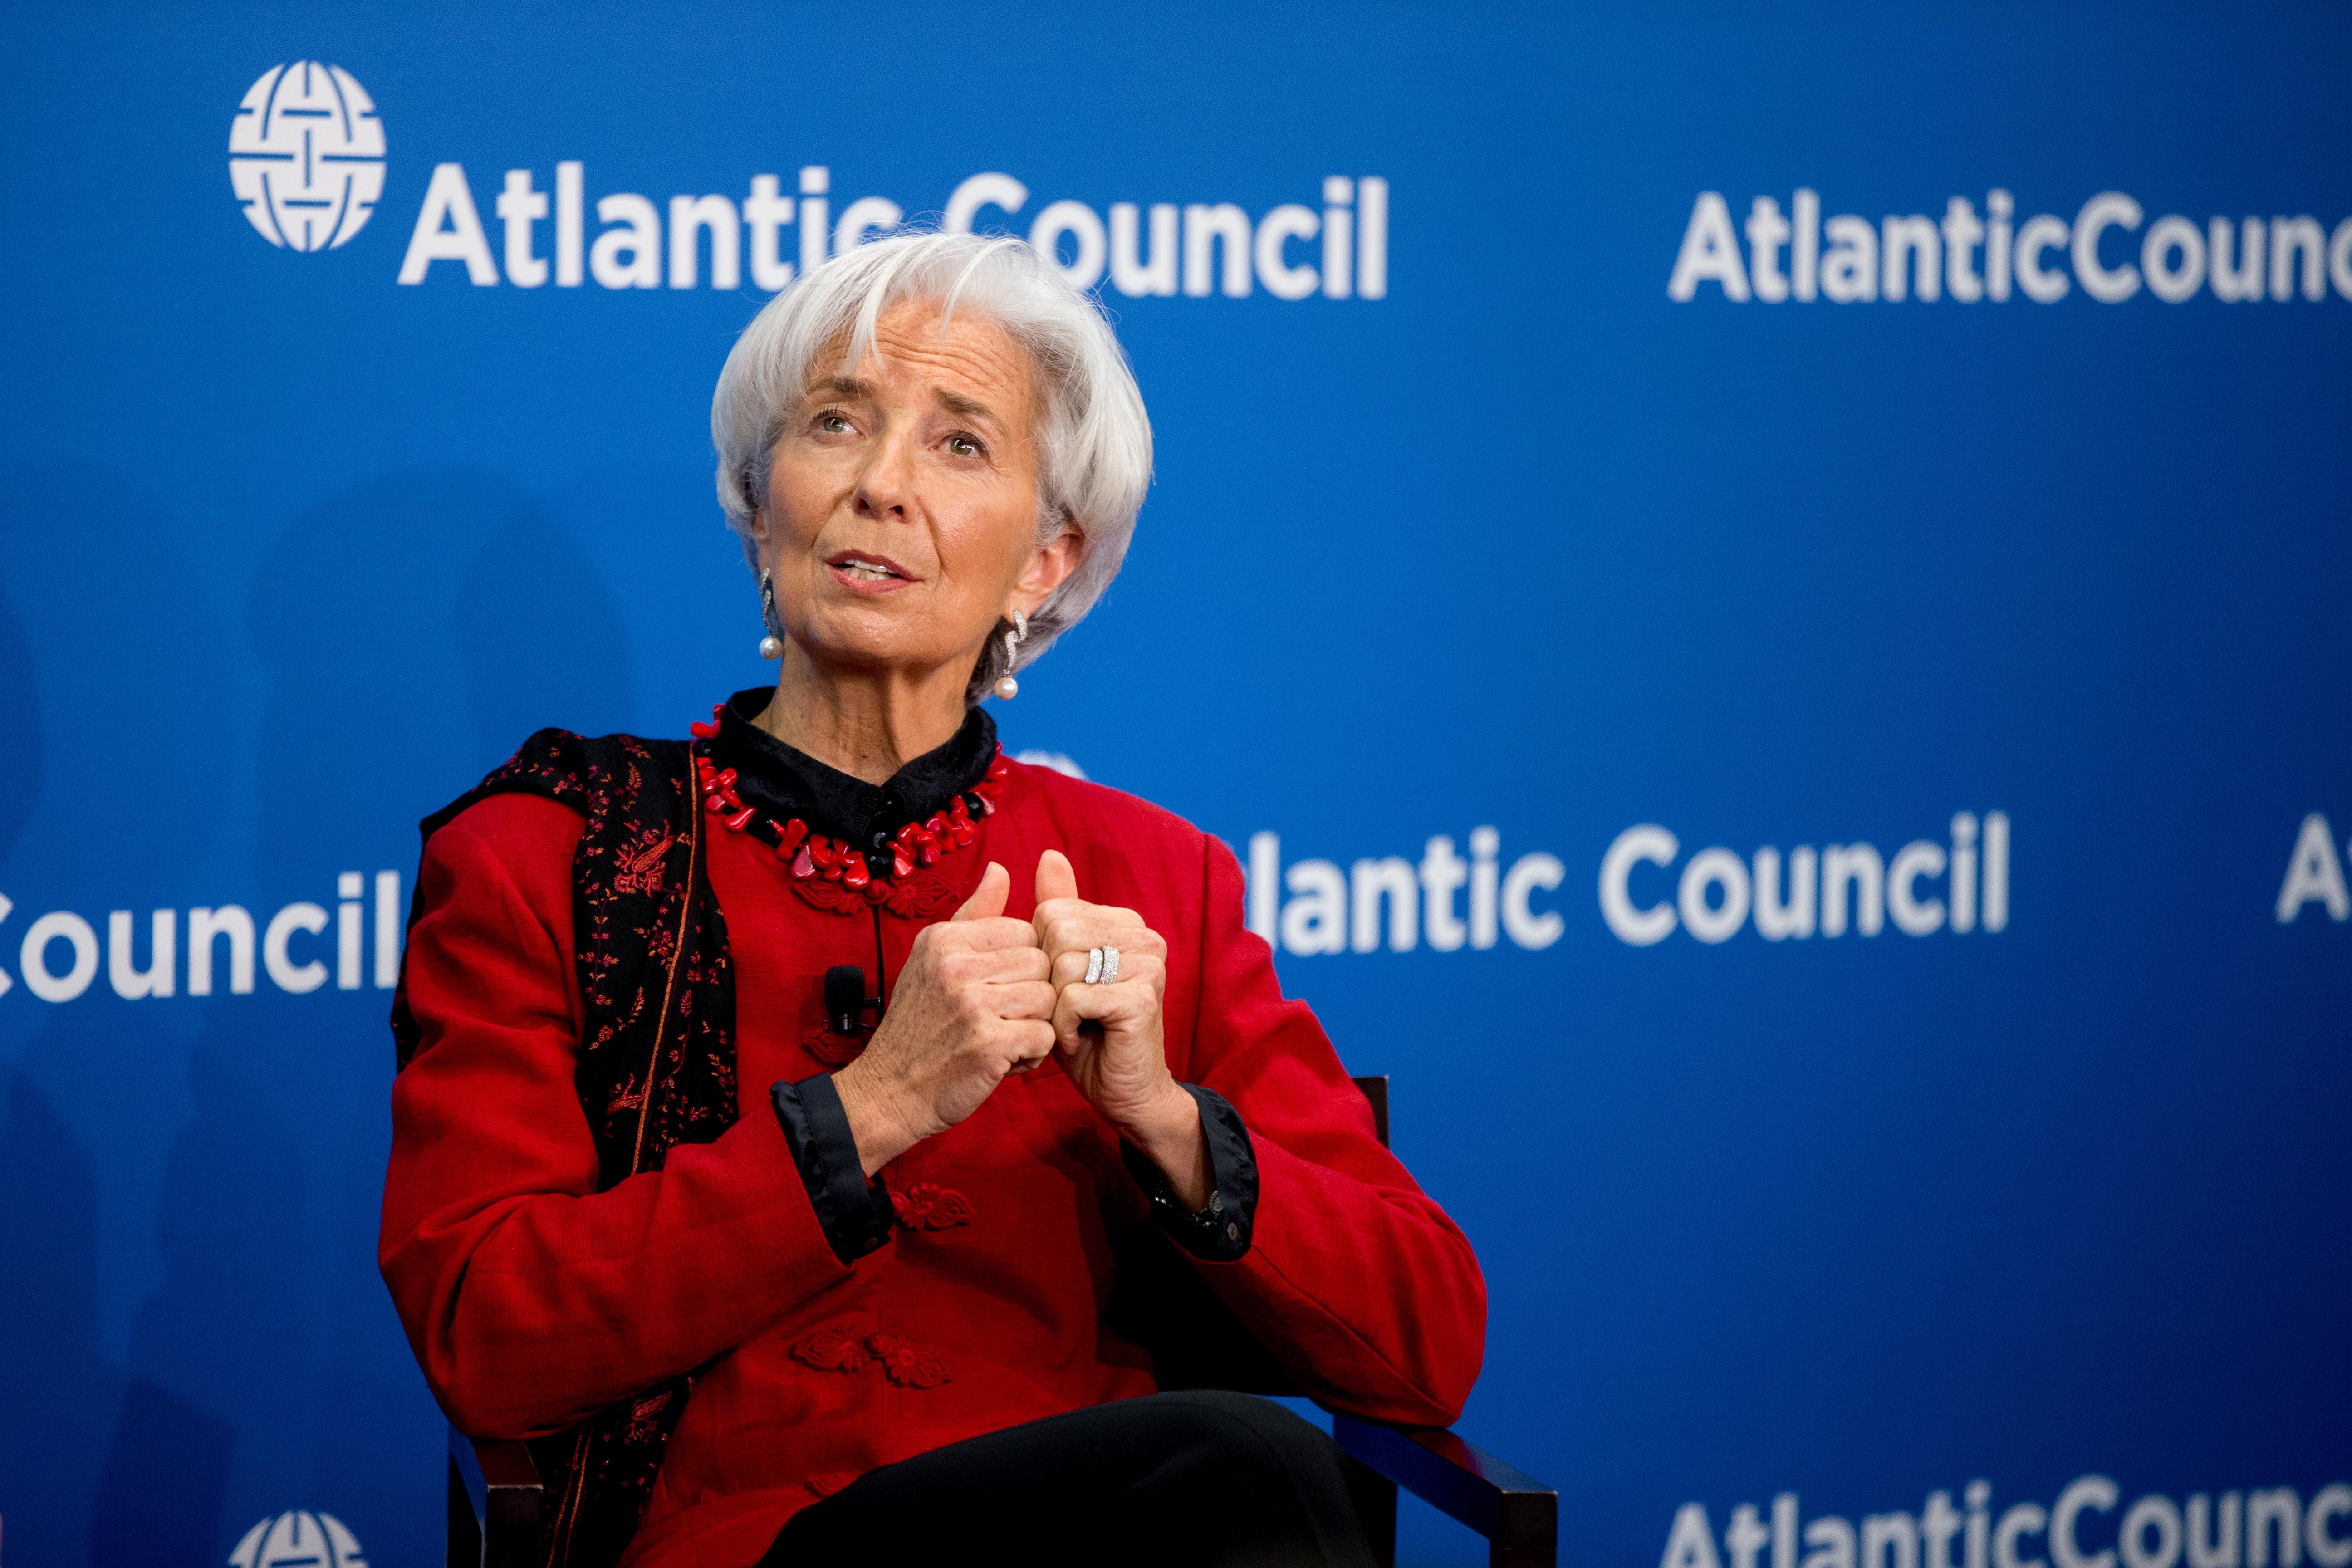 In this Thursday, April 9, 2015 photo, International Monetary Fund Managing Director Christine Lagarde speaks at the Atlantic Council in Washington.  The IMF predicted Tuesday, April 14,  that the American economy will grow 3.1 percent this year and next, a performance the fund characterized as "robust." But the U.S. outlook was down from the IMF's January forecast of 3.6 percent growth in 2015 and 3.3 percent growth in 2016. The American economy advanced 2.4 percent last year.(AP Photo/Andrew Harnik)